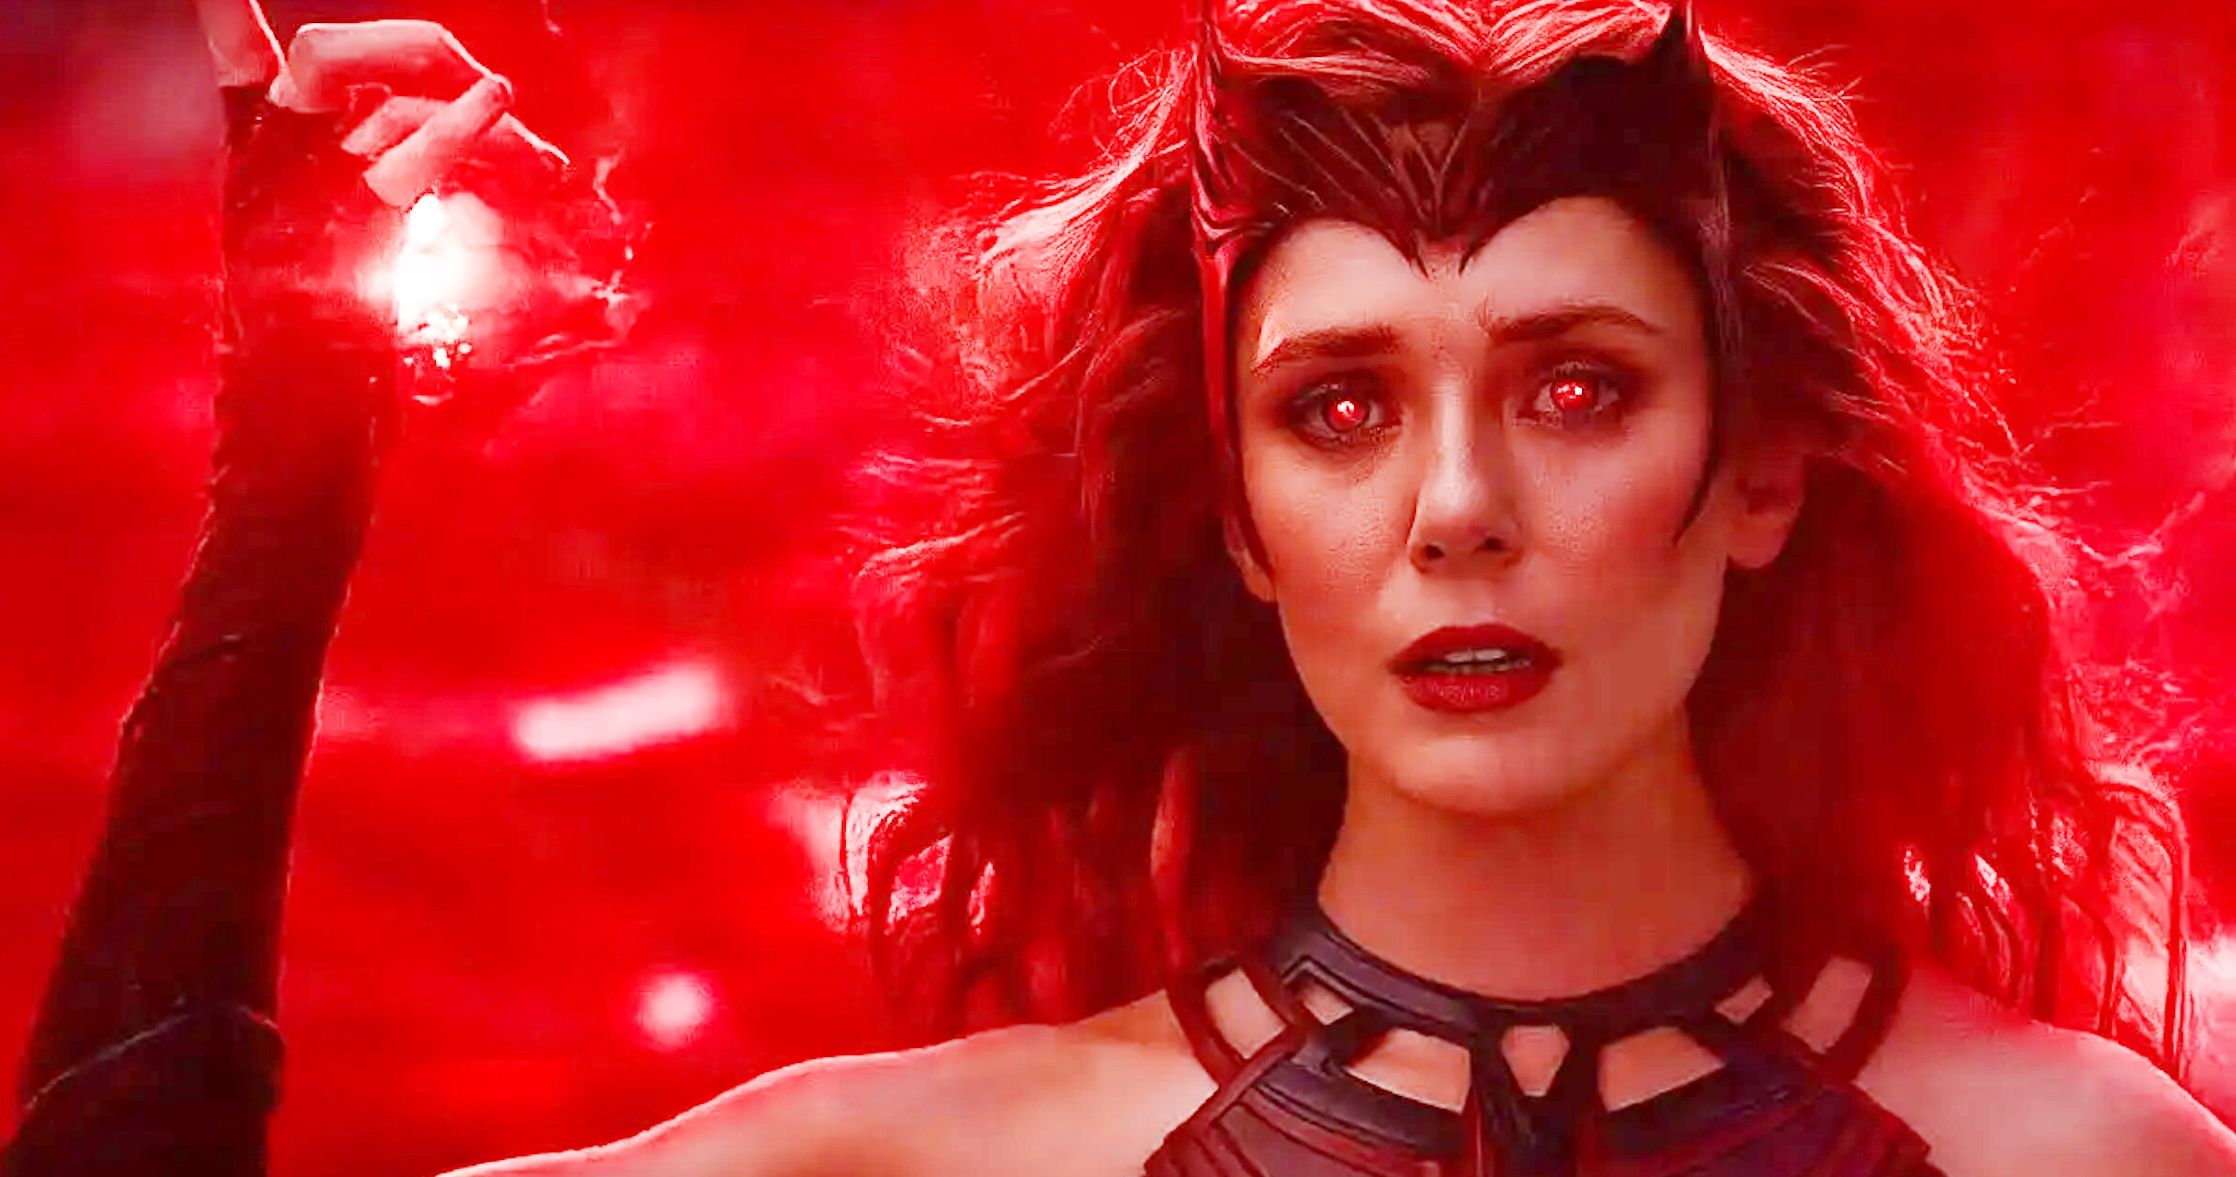 WandaVision Star Elizabeth Olsen Defends Scarlet Witch's Actions in Criticized Finale